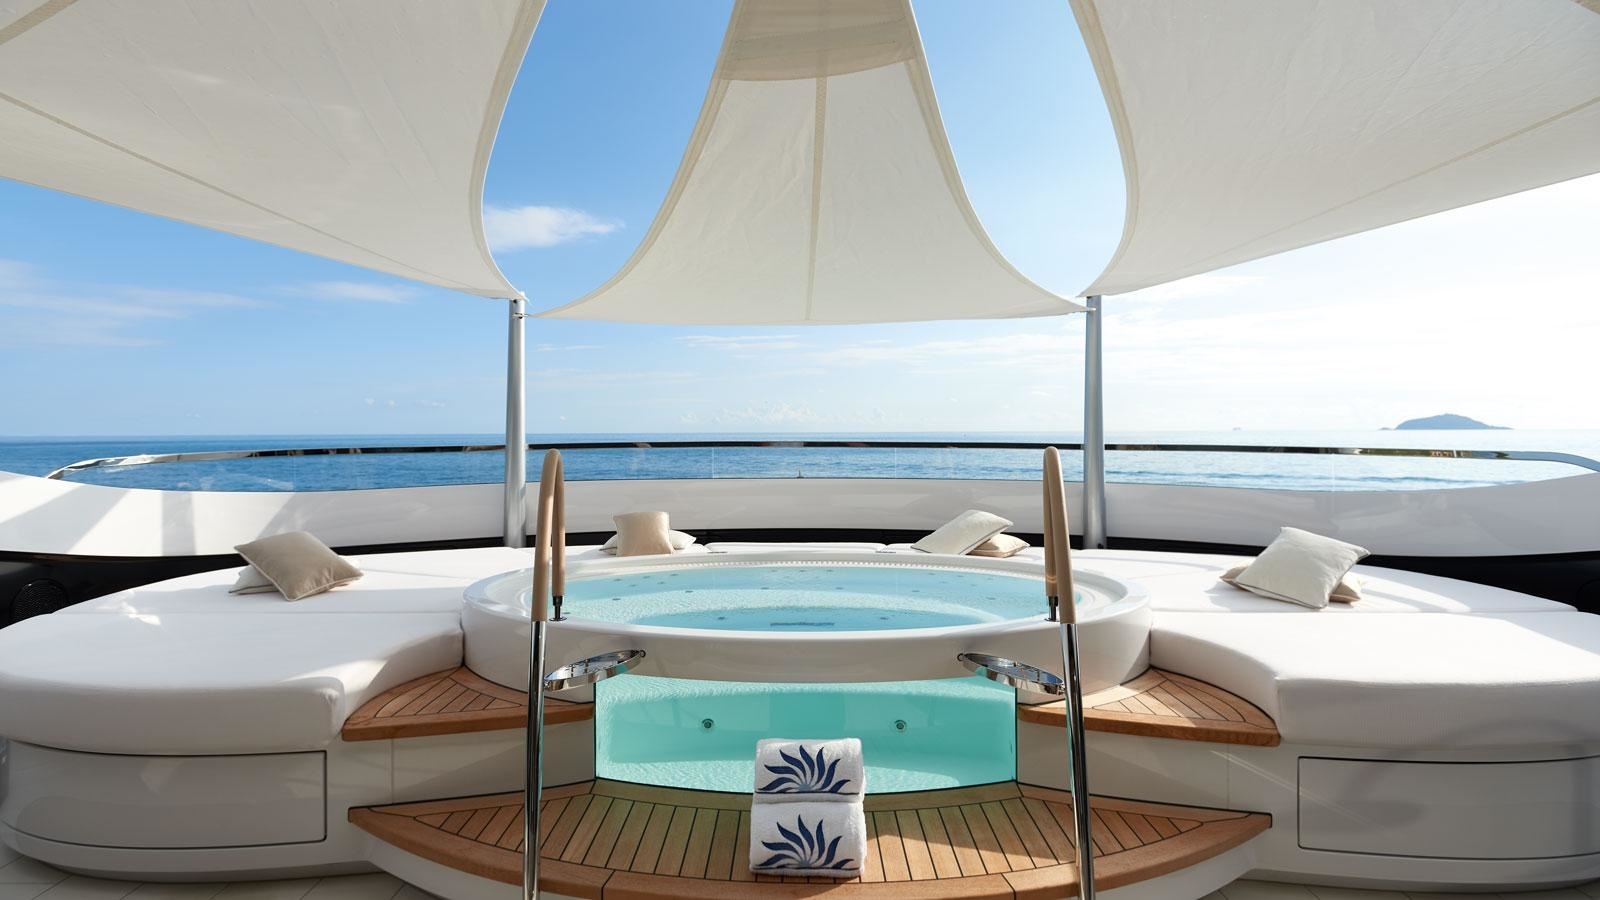 The upper deck is entirely at the owner's disposal. There is a terrace overlooking the bow of the boat and a Jacuzzi. Surely it has been noticed that the furniture on the open areas is exceptionally light, the teak decks are also warm in shades - nothing should interfere with the relaxed sunbathing.